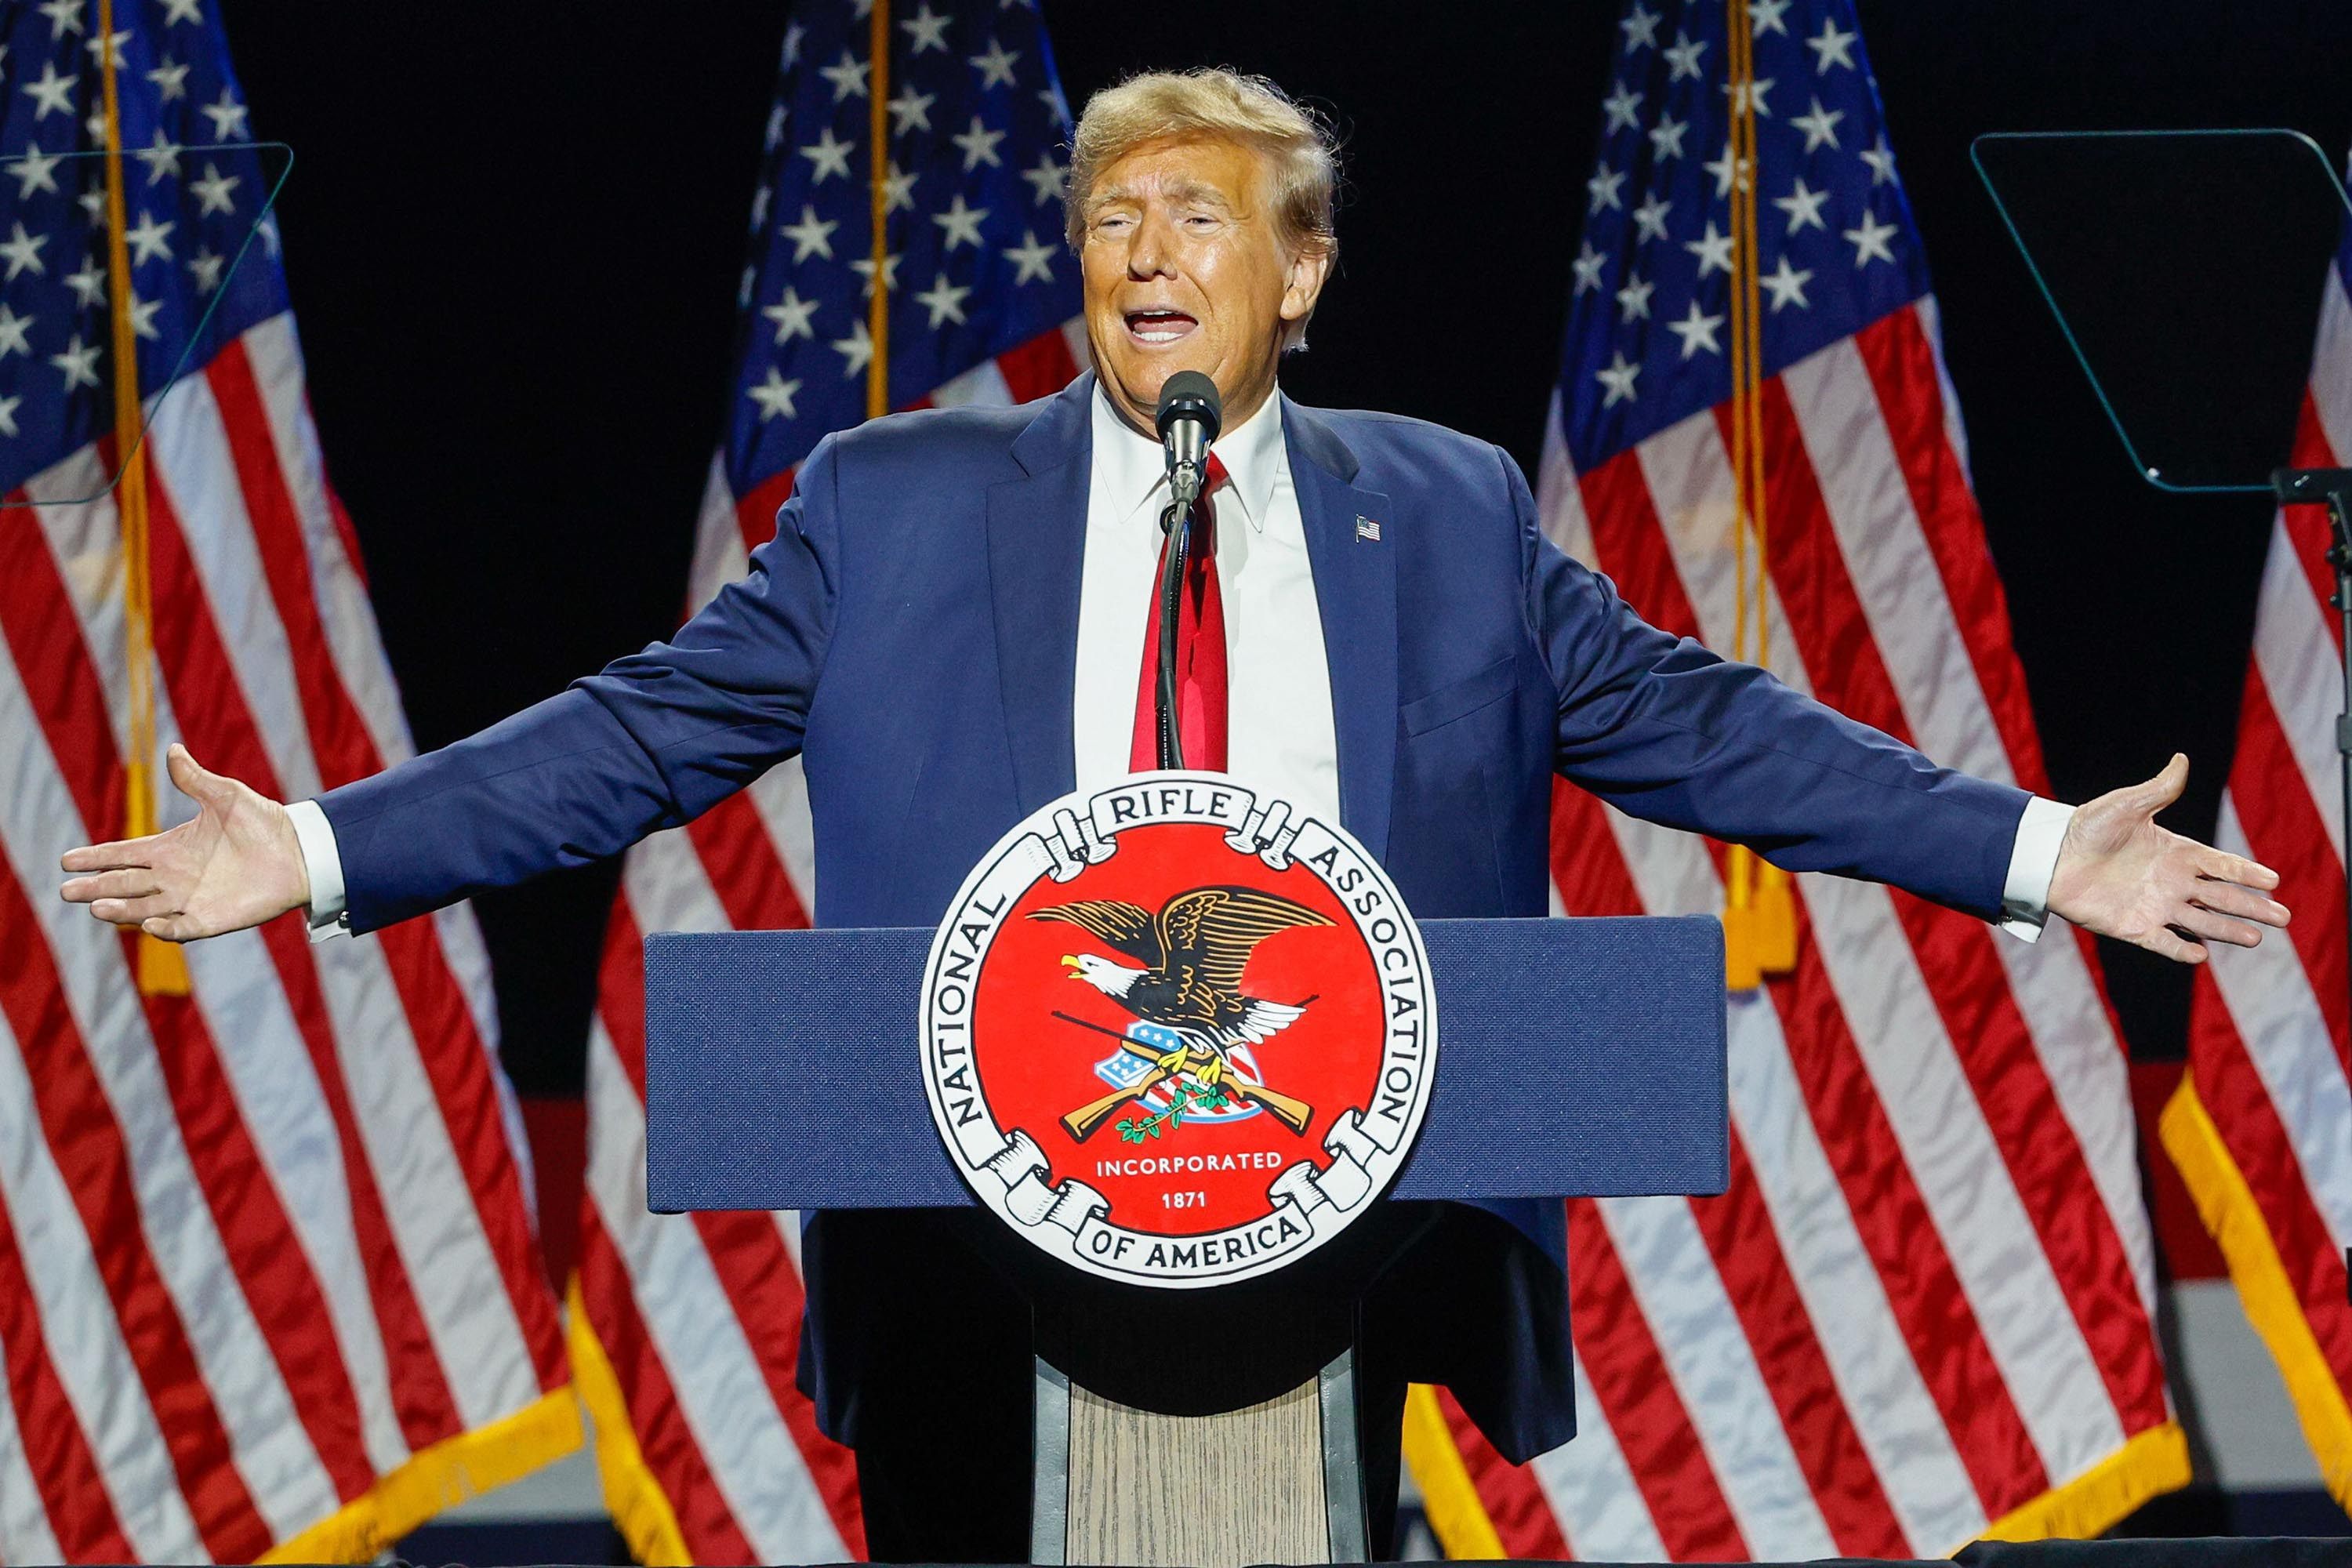 Former US president Donald Trump speaks at the National Rifle Association’s Presidential Forum in Harrisburg, Pennsylvania, in February. Photo: TNS